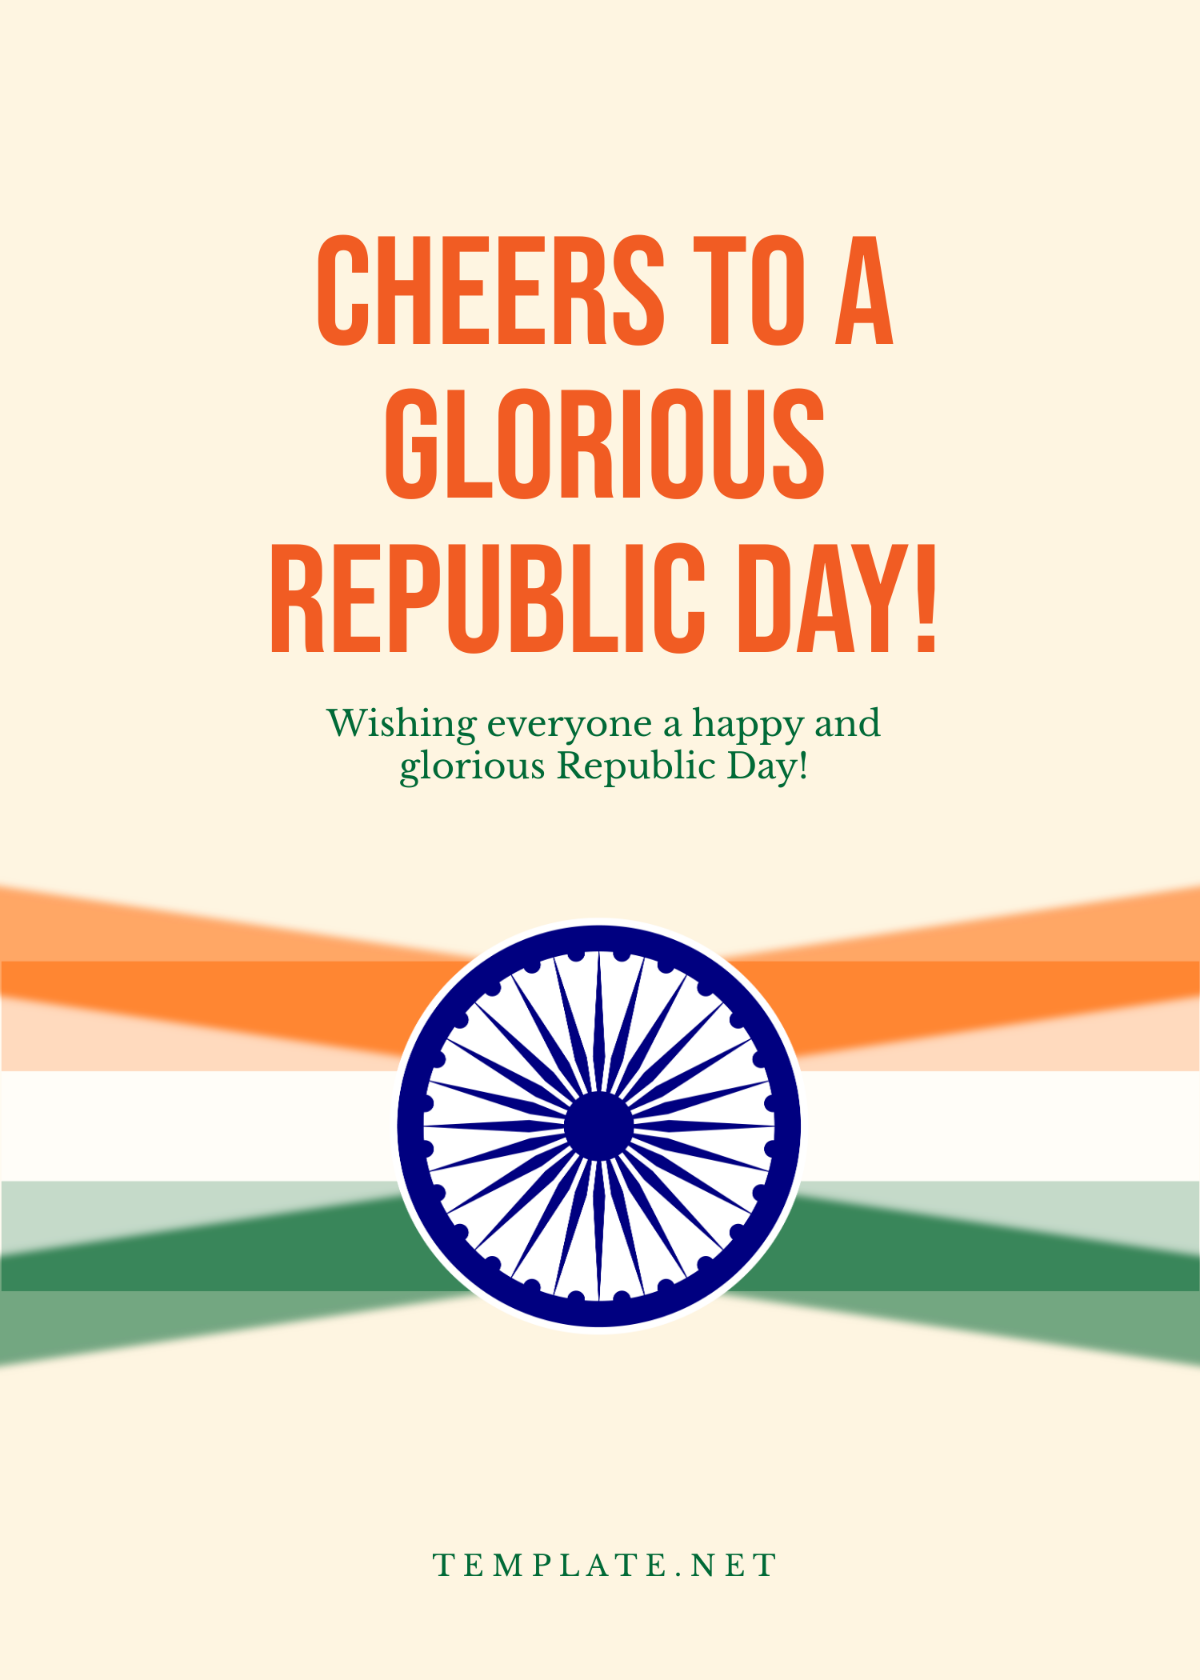 Free Republic Day Greeting Card Wishes Template